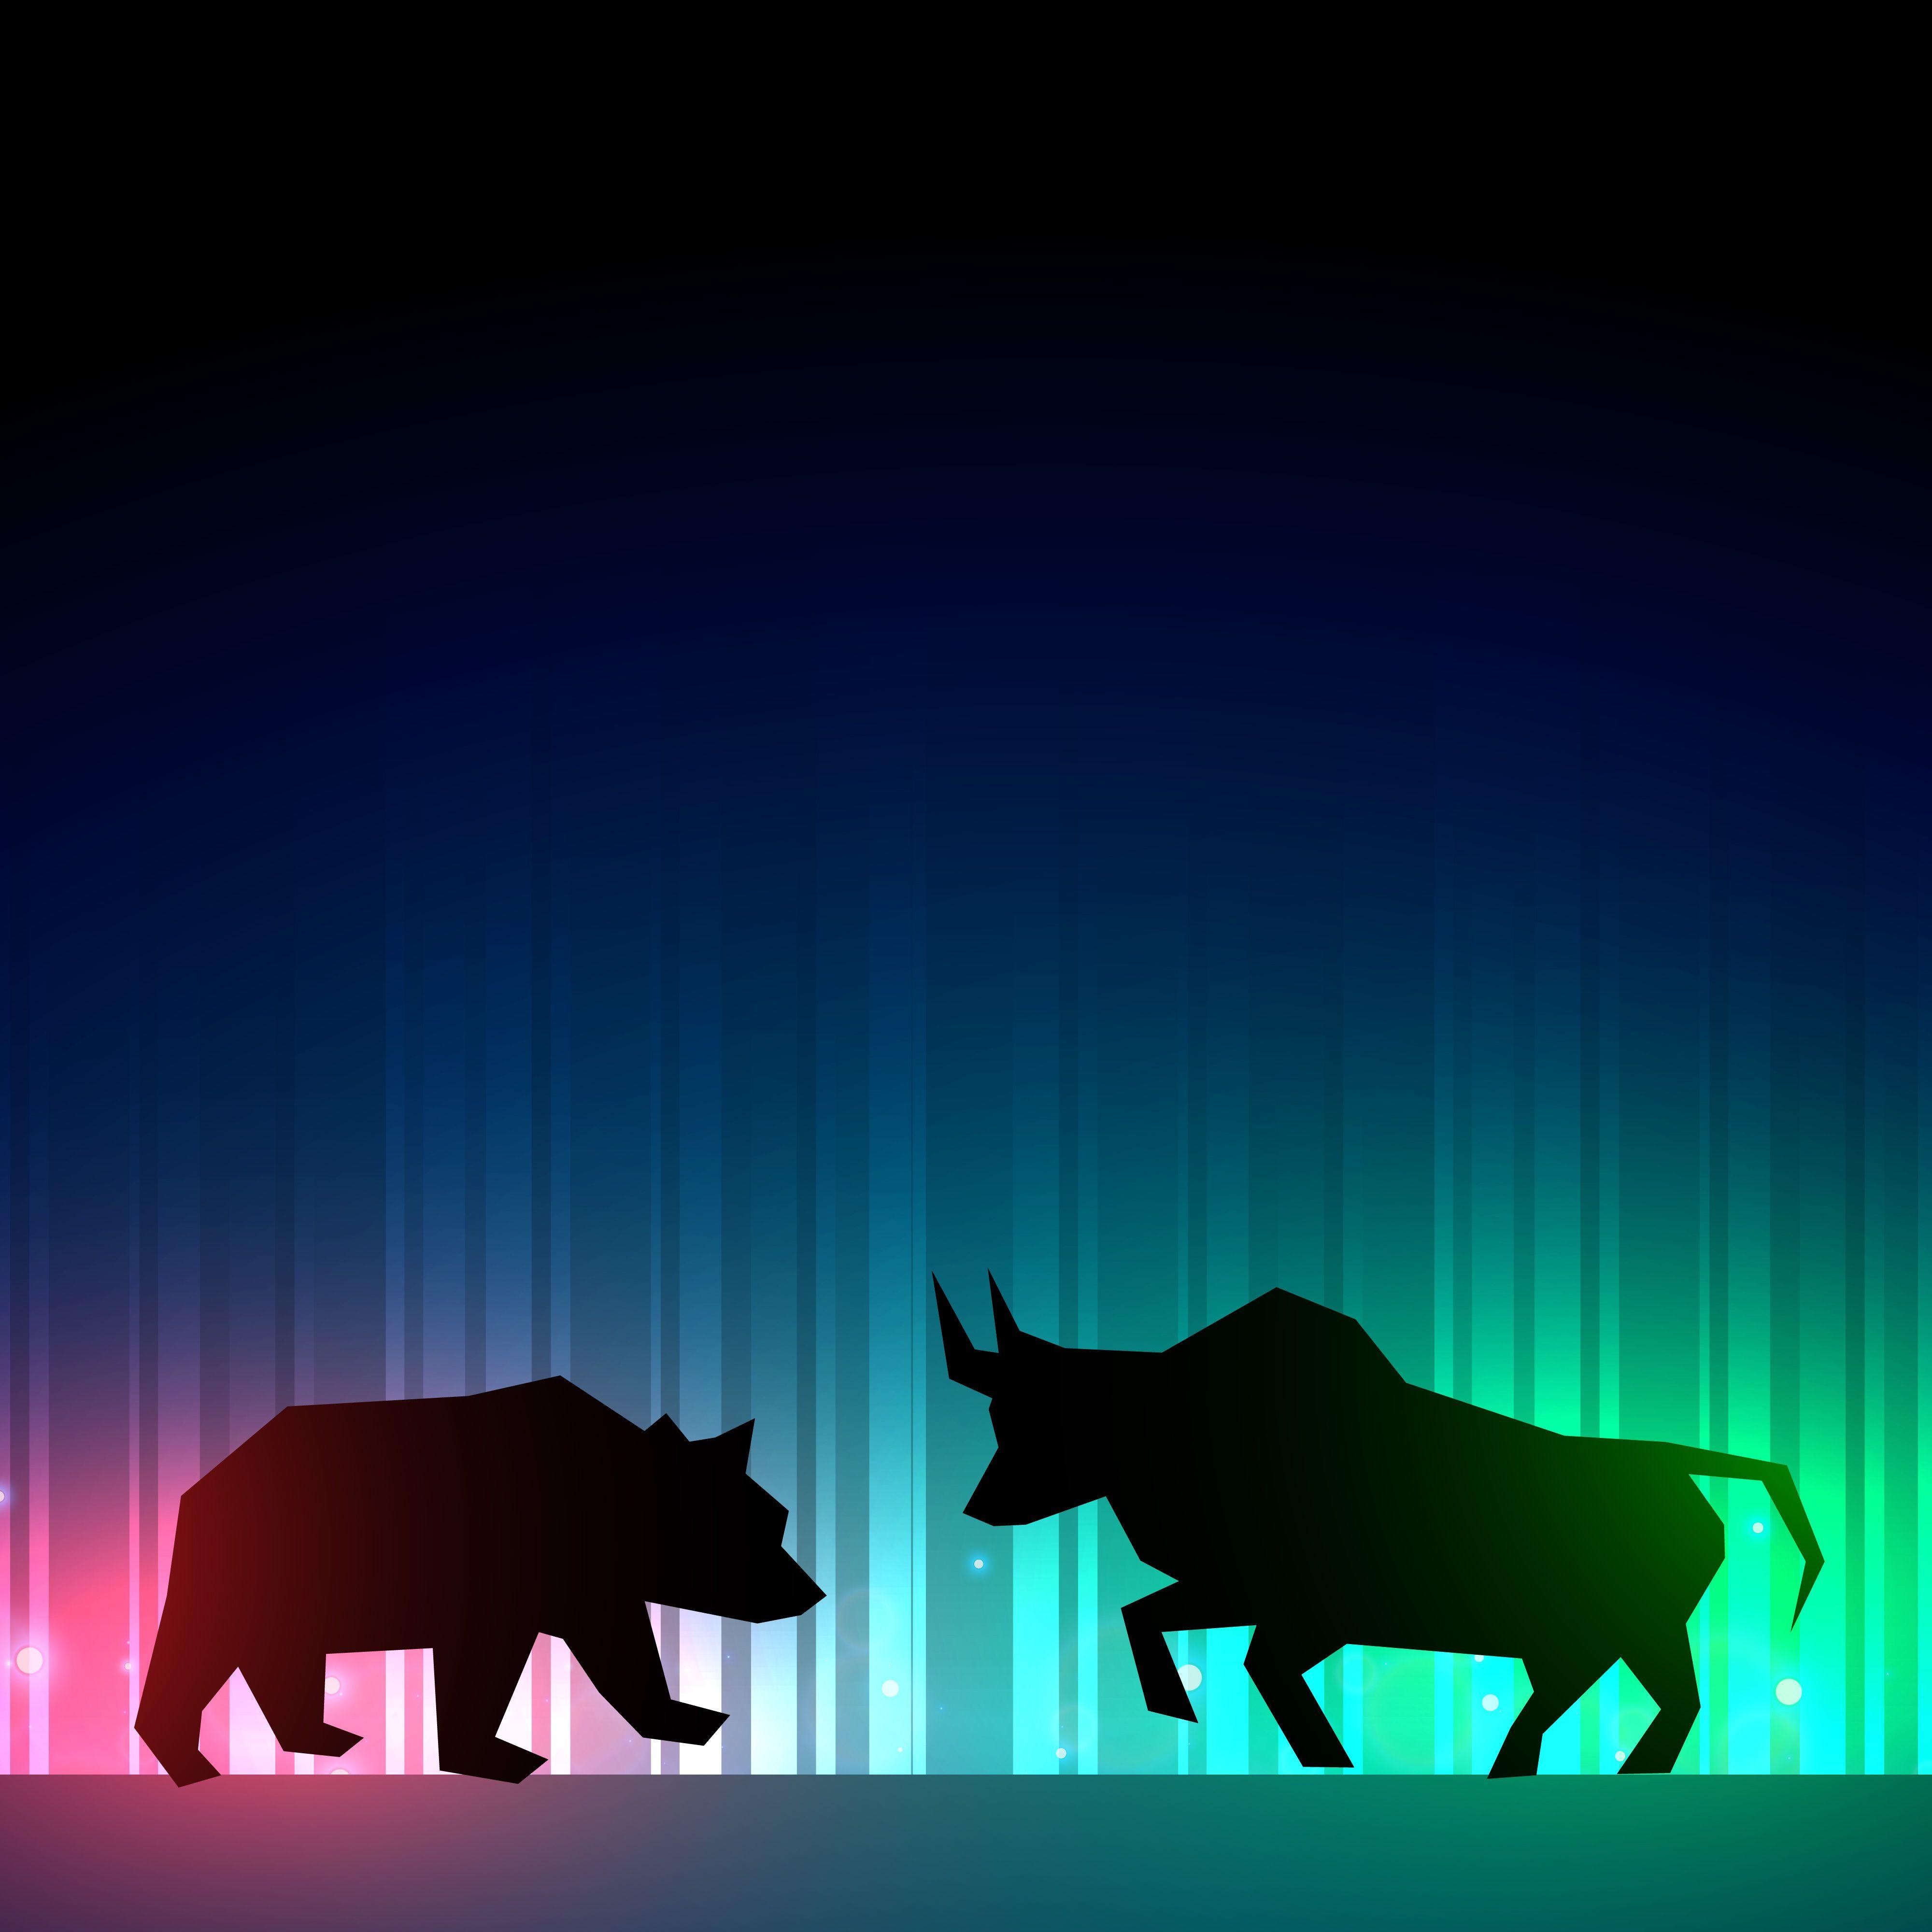 Golden Bull And Bear On Stock Data Chart Background Investing Stock  Exchange Financial Bearish And Mullish Market Concept Stock Photo   Download Image Now  iStock